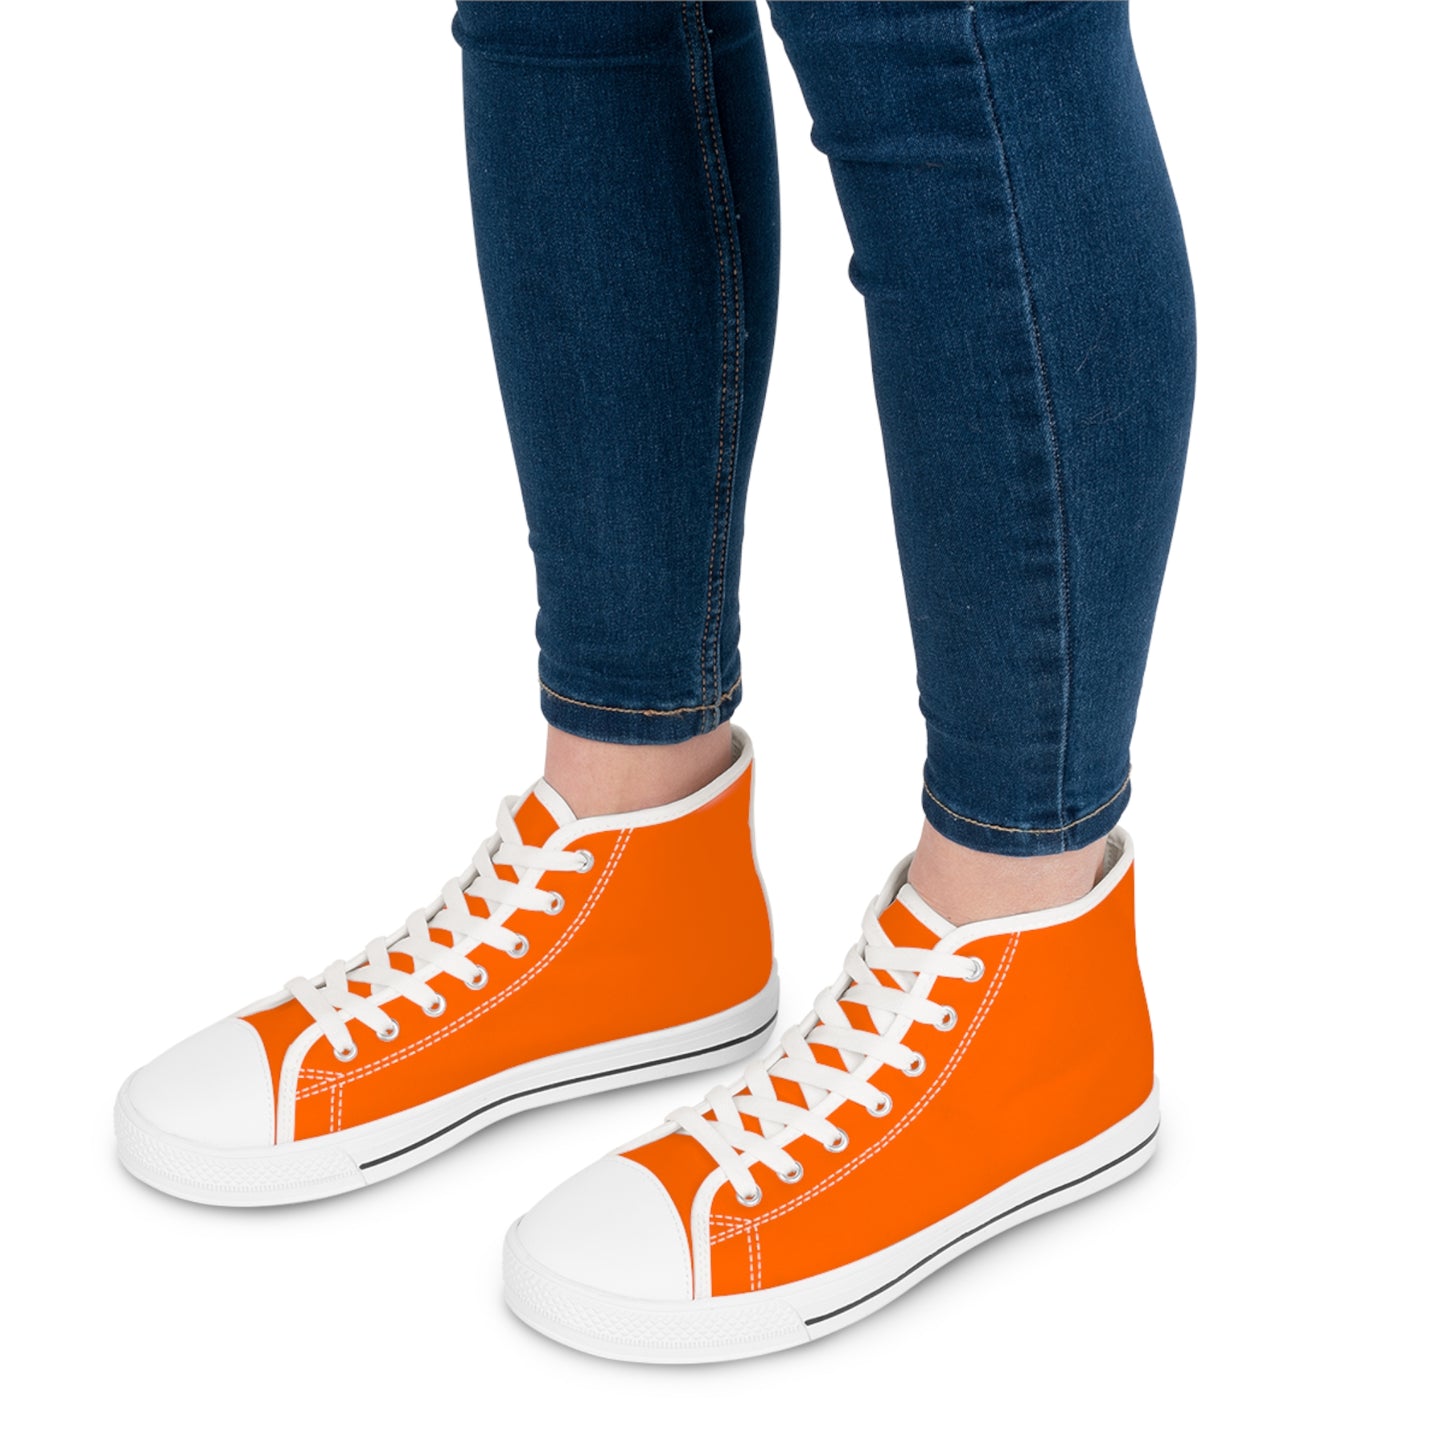 Women's Canvas High Top Solid Color Sneakers - Electric Orange US 12 White sole